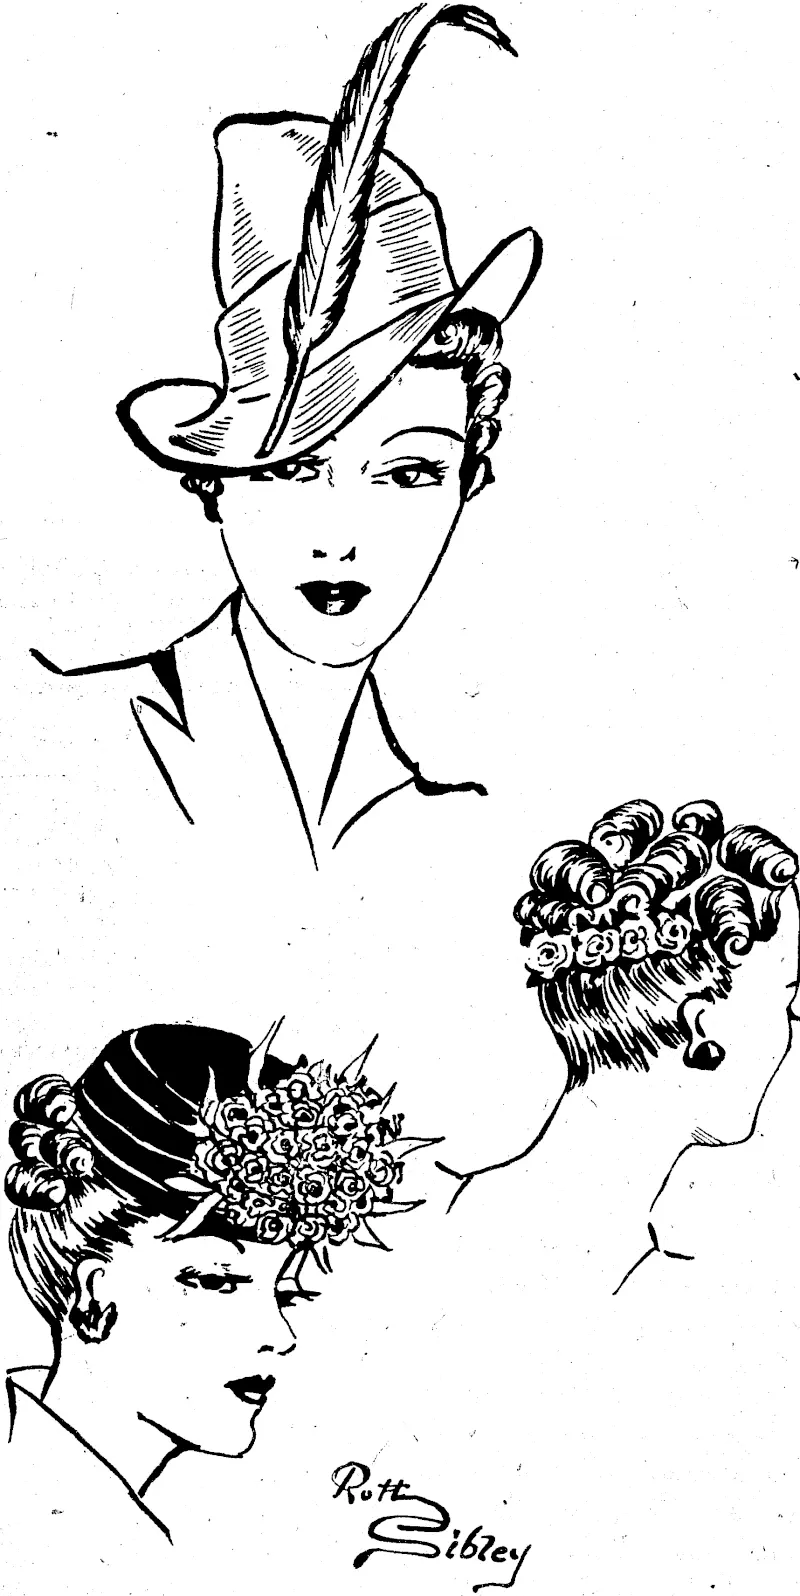 Height in hats and hairdressing is a mode of the moment. The; forward tilt and the flower trimming on pill-box shapes is a. successful model for many- materials. (Evening Post, 01 October 1938)